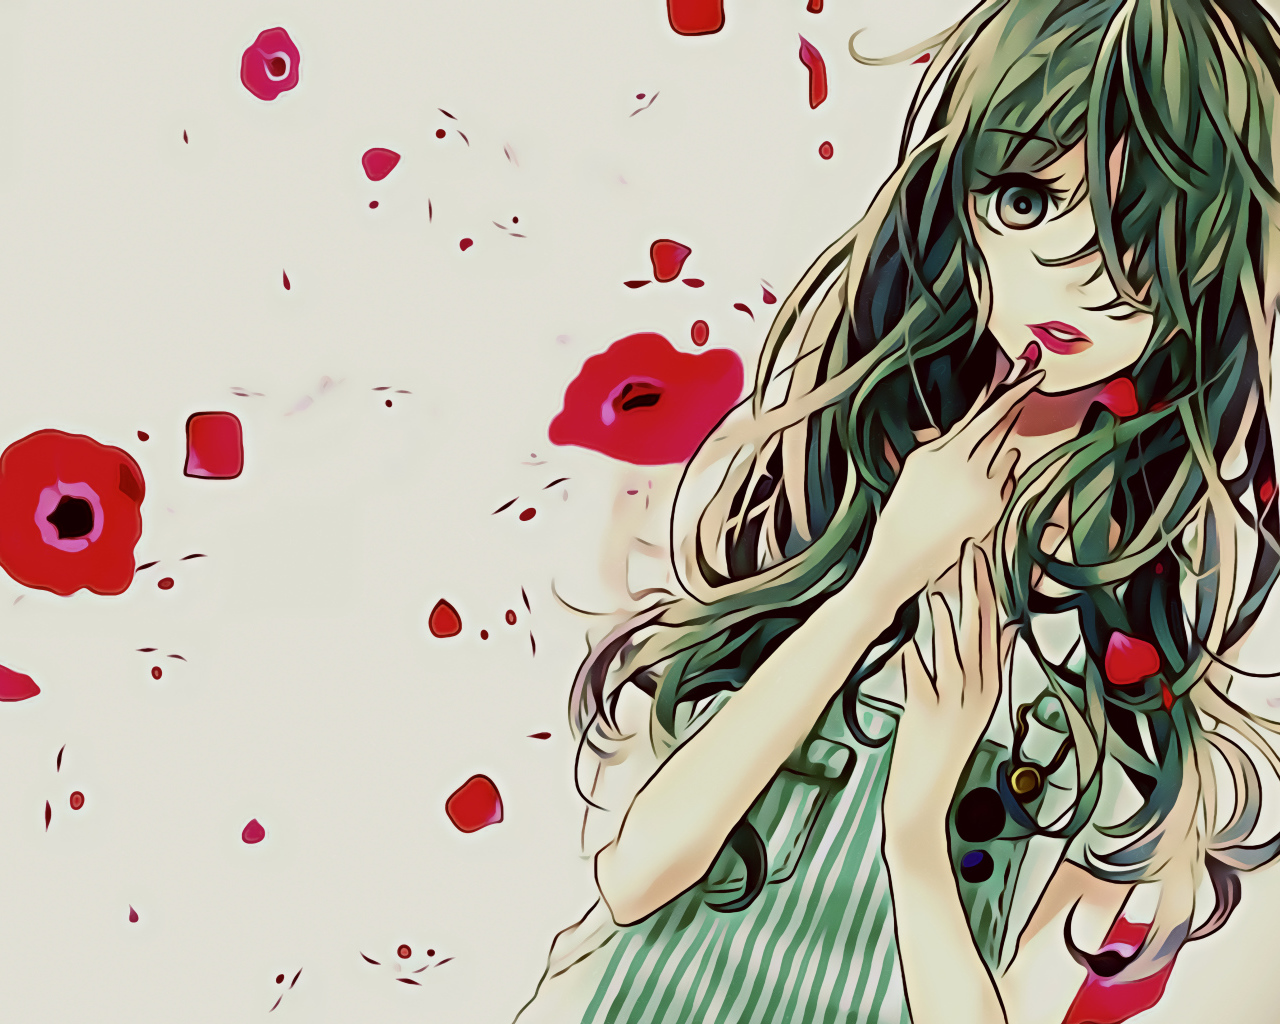 Anime girl on a background with red poppies